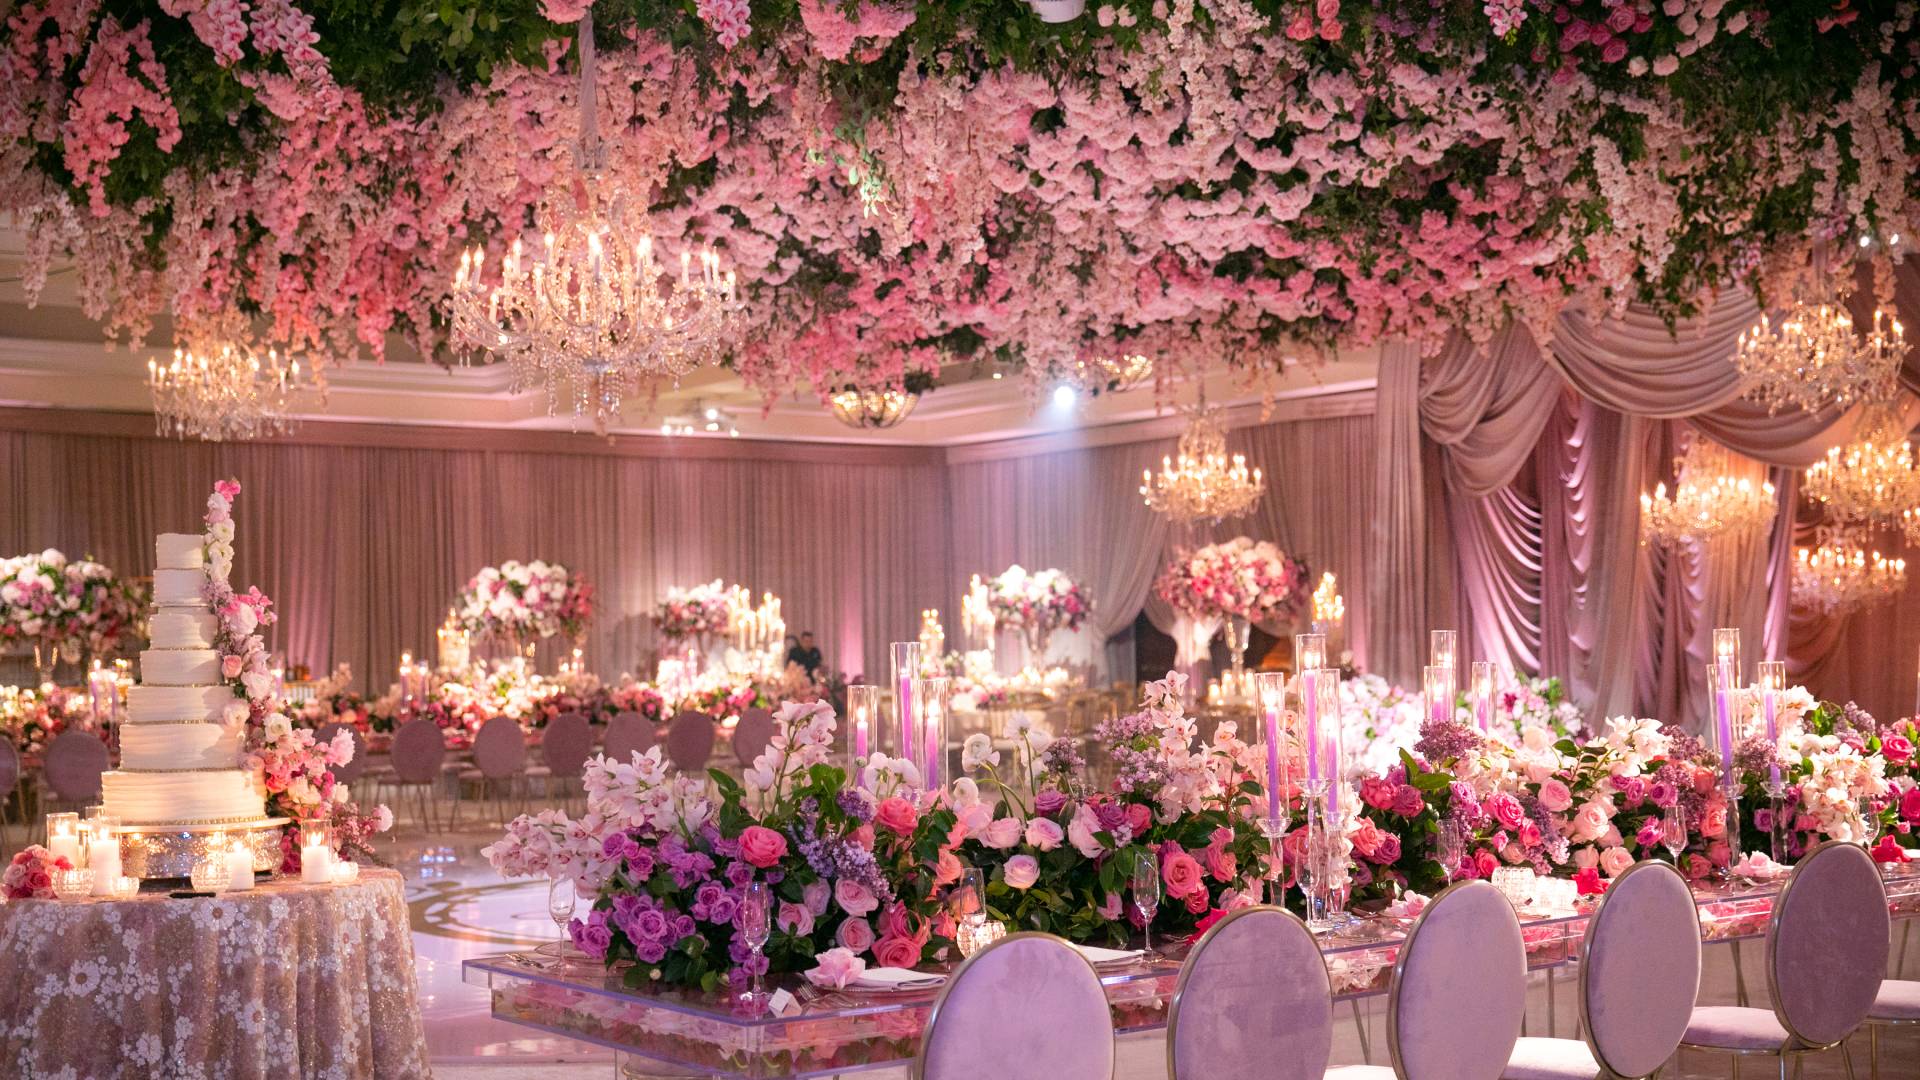 Room Decorated with Flowers for a Wedding Celebration